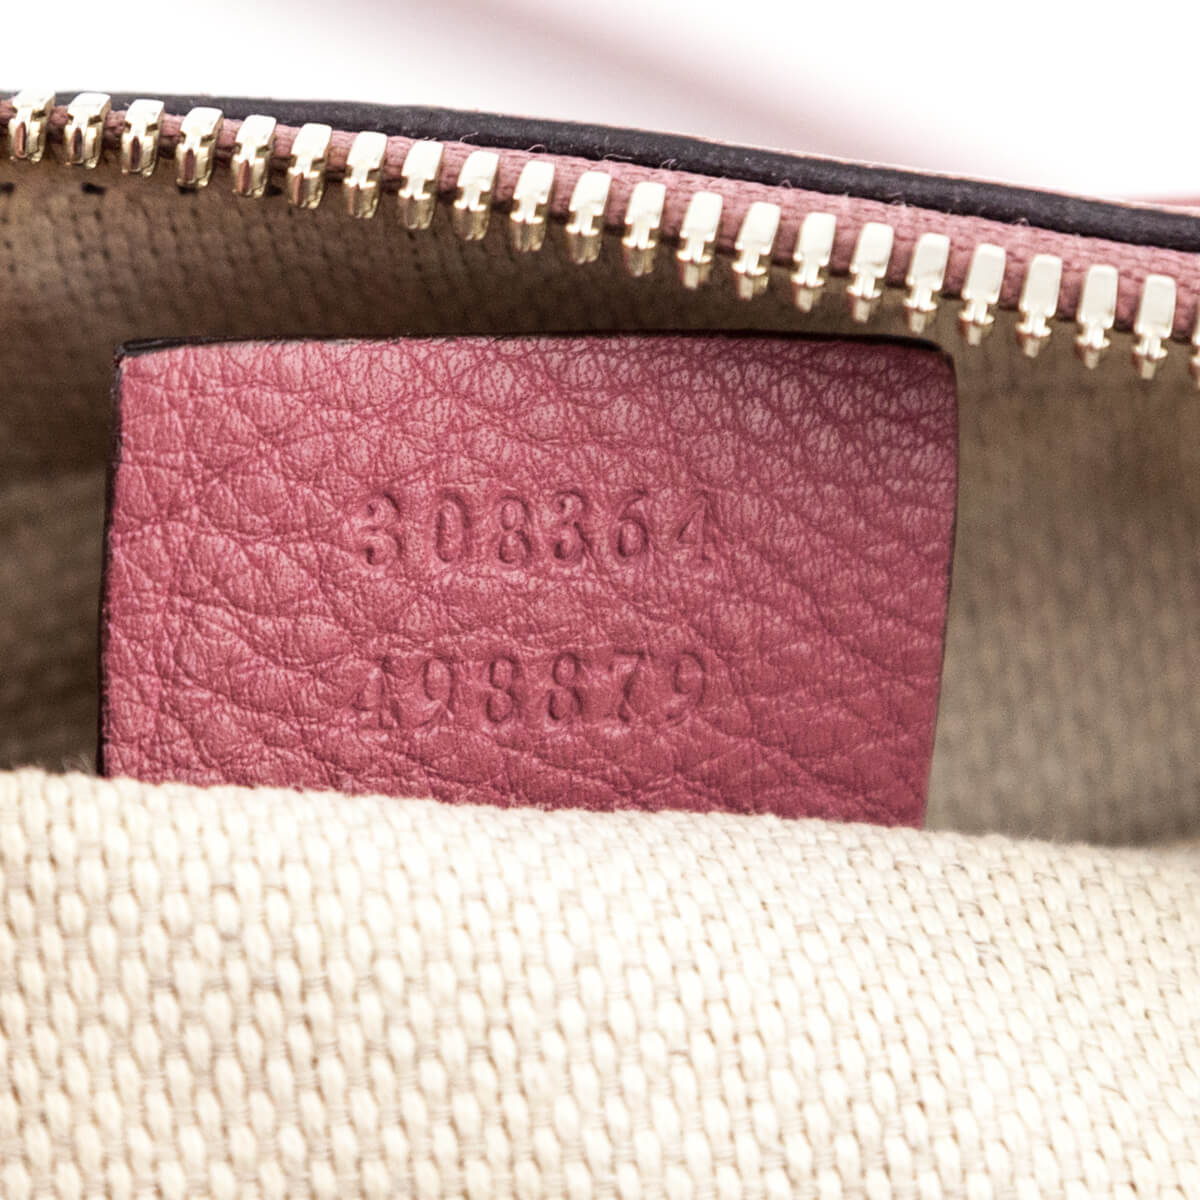 Gucci Dusty Rose Soho Disco - Authentic Gucci Bags Canada